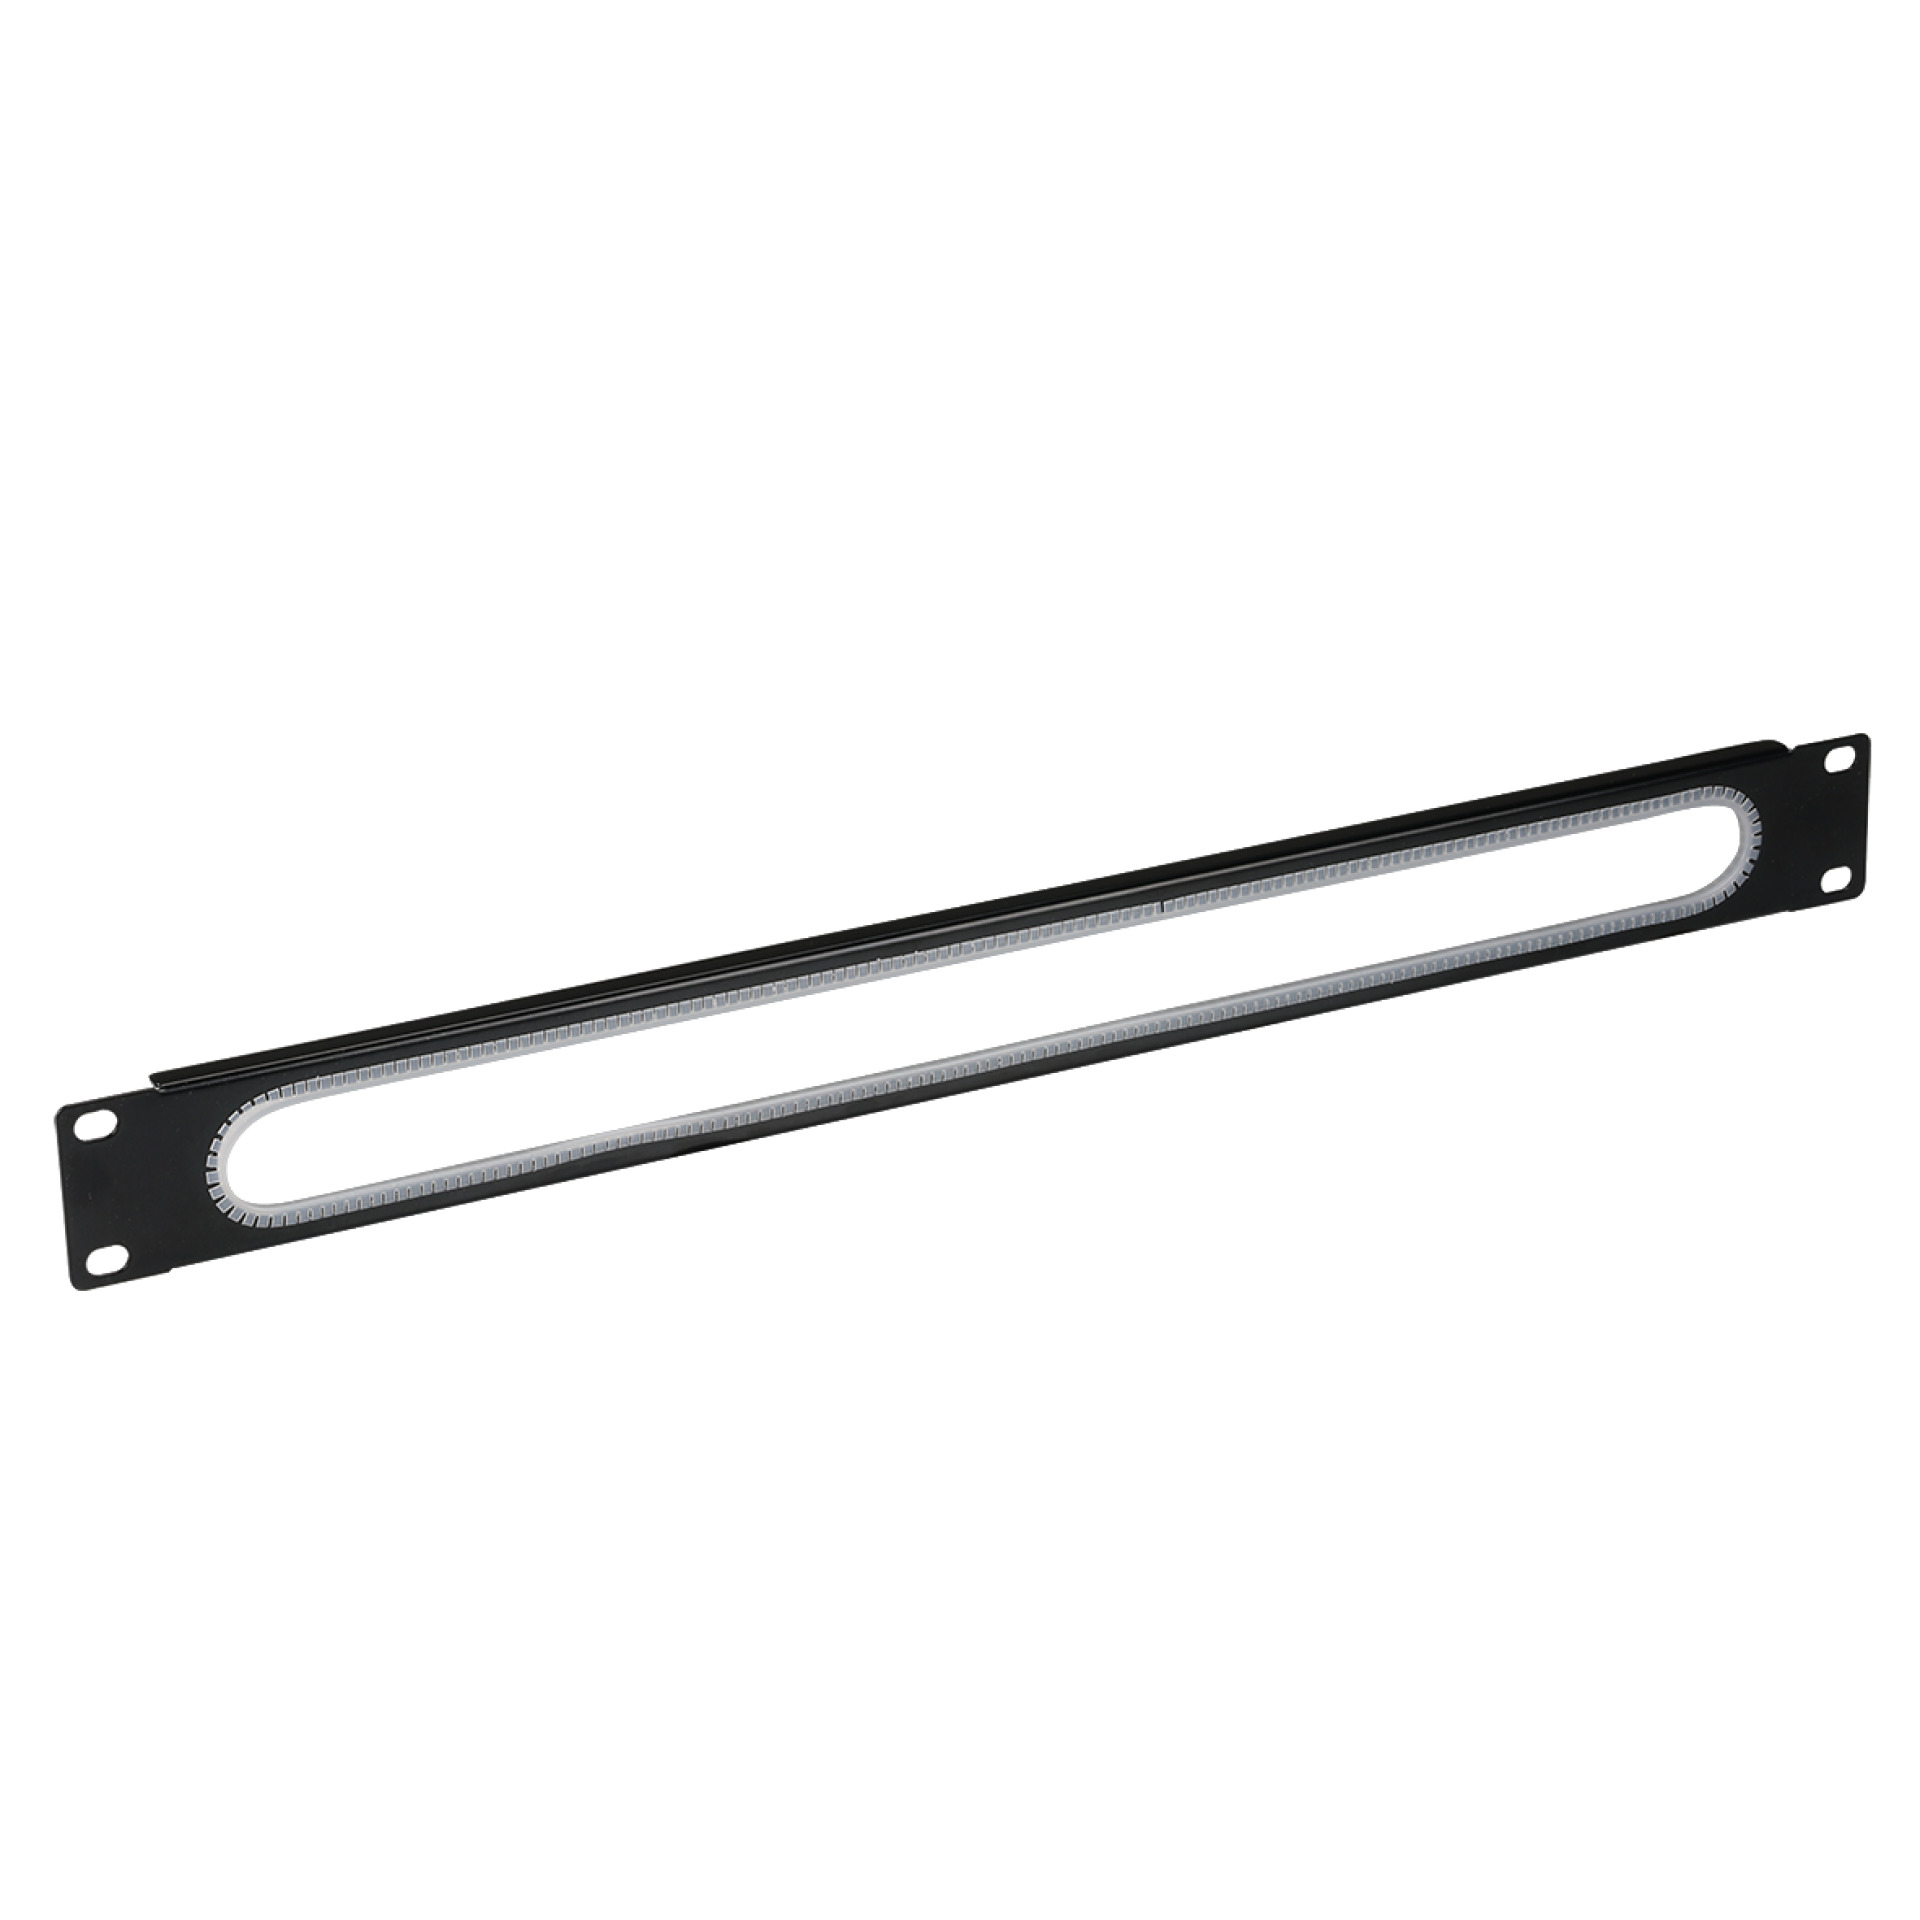 19" 1U Cable Feedtrough Panel, Edge Protection, Steel RAL7035